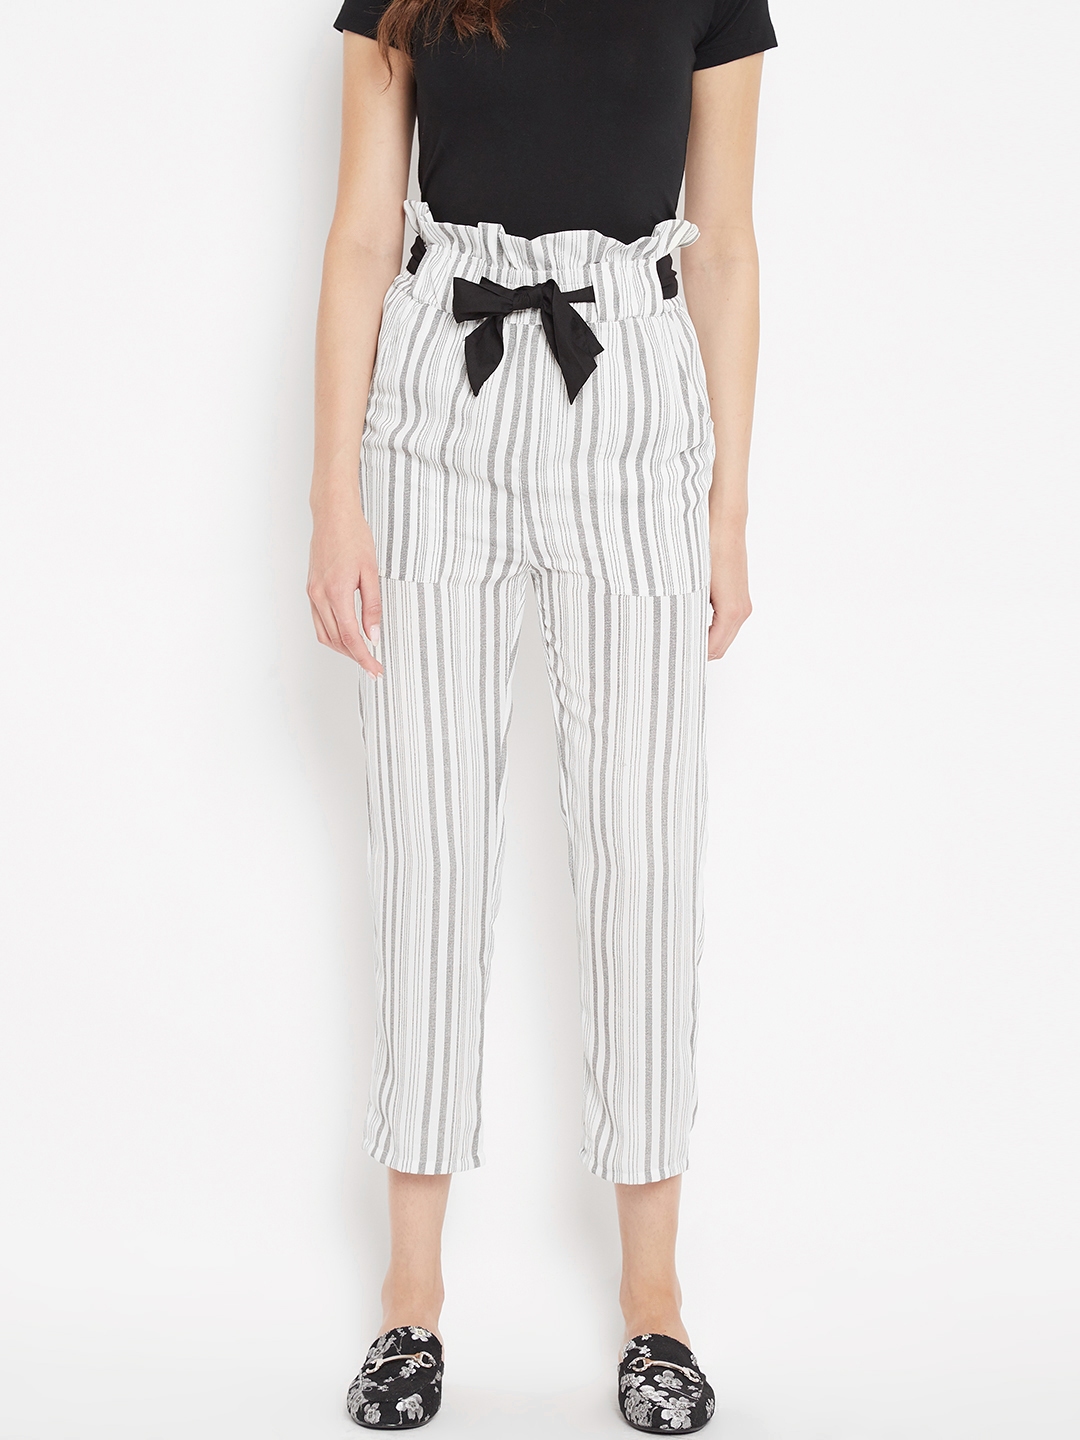 Buy Womens Black  White Striped Lounge Pants Online in India at Bewakoof